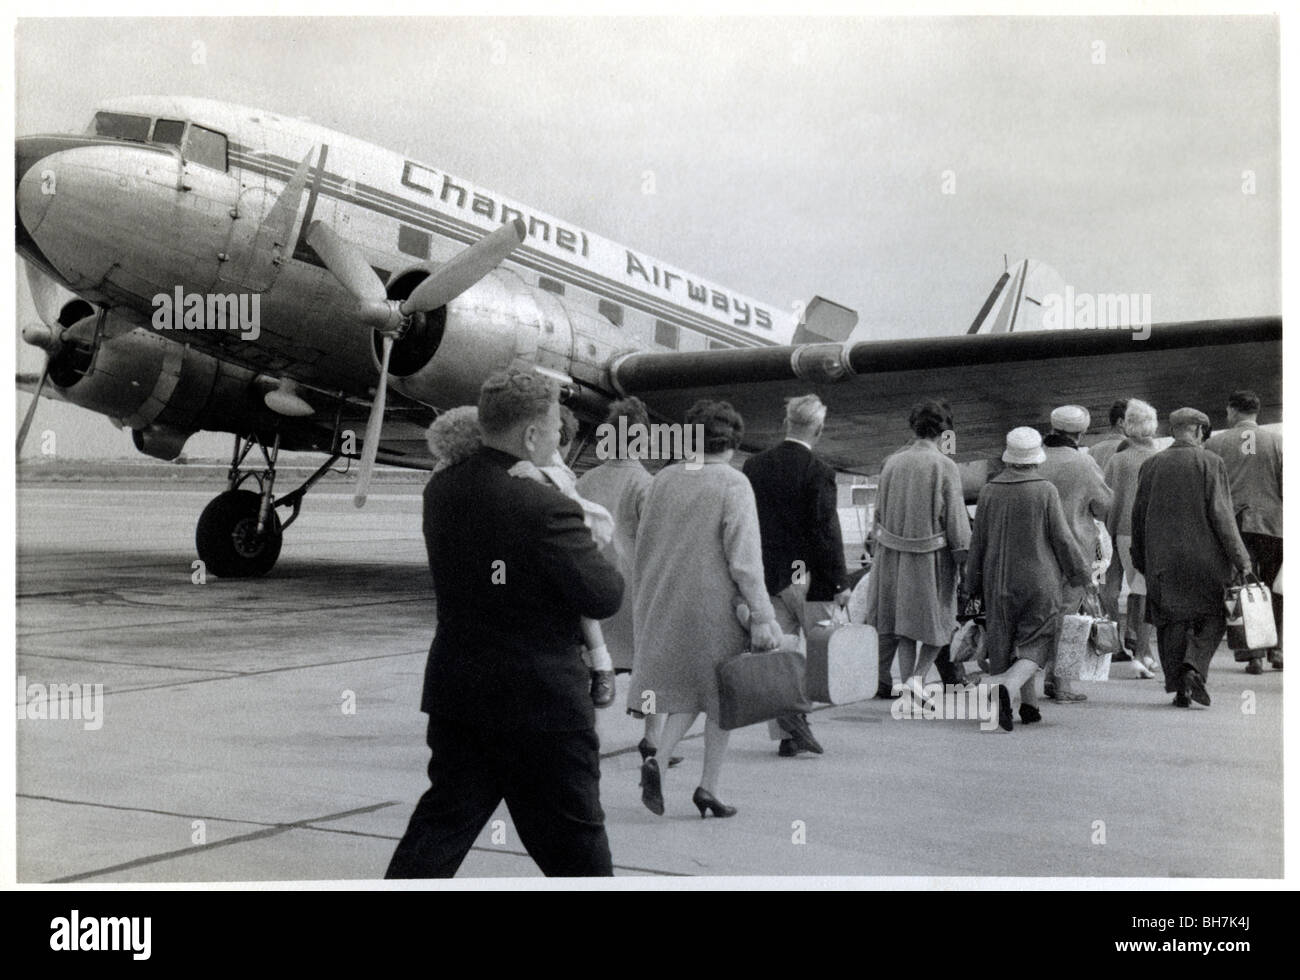 VINTAGE AIRLINE PASSENGERS 1950’s-1960s Air Travel foreign post- war ...